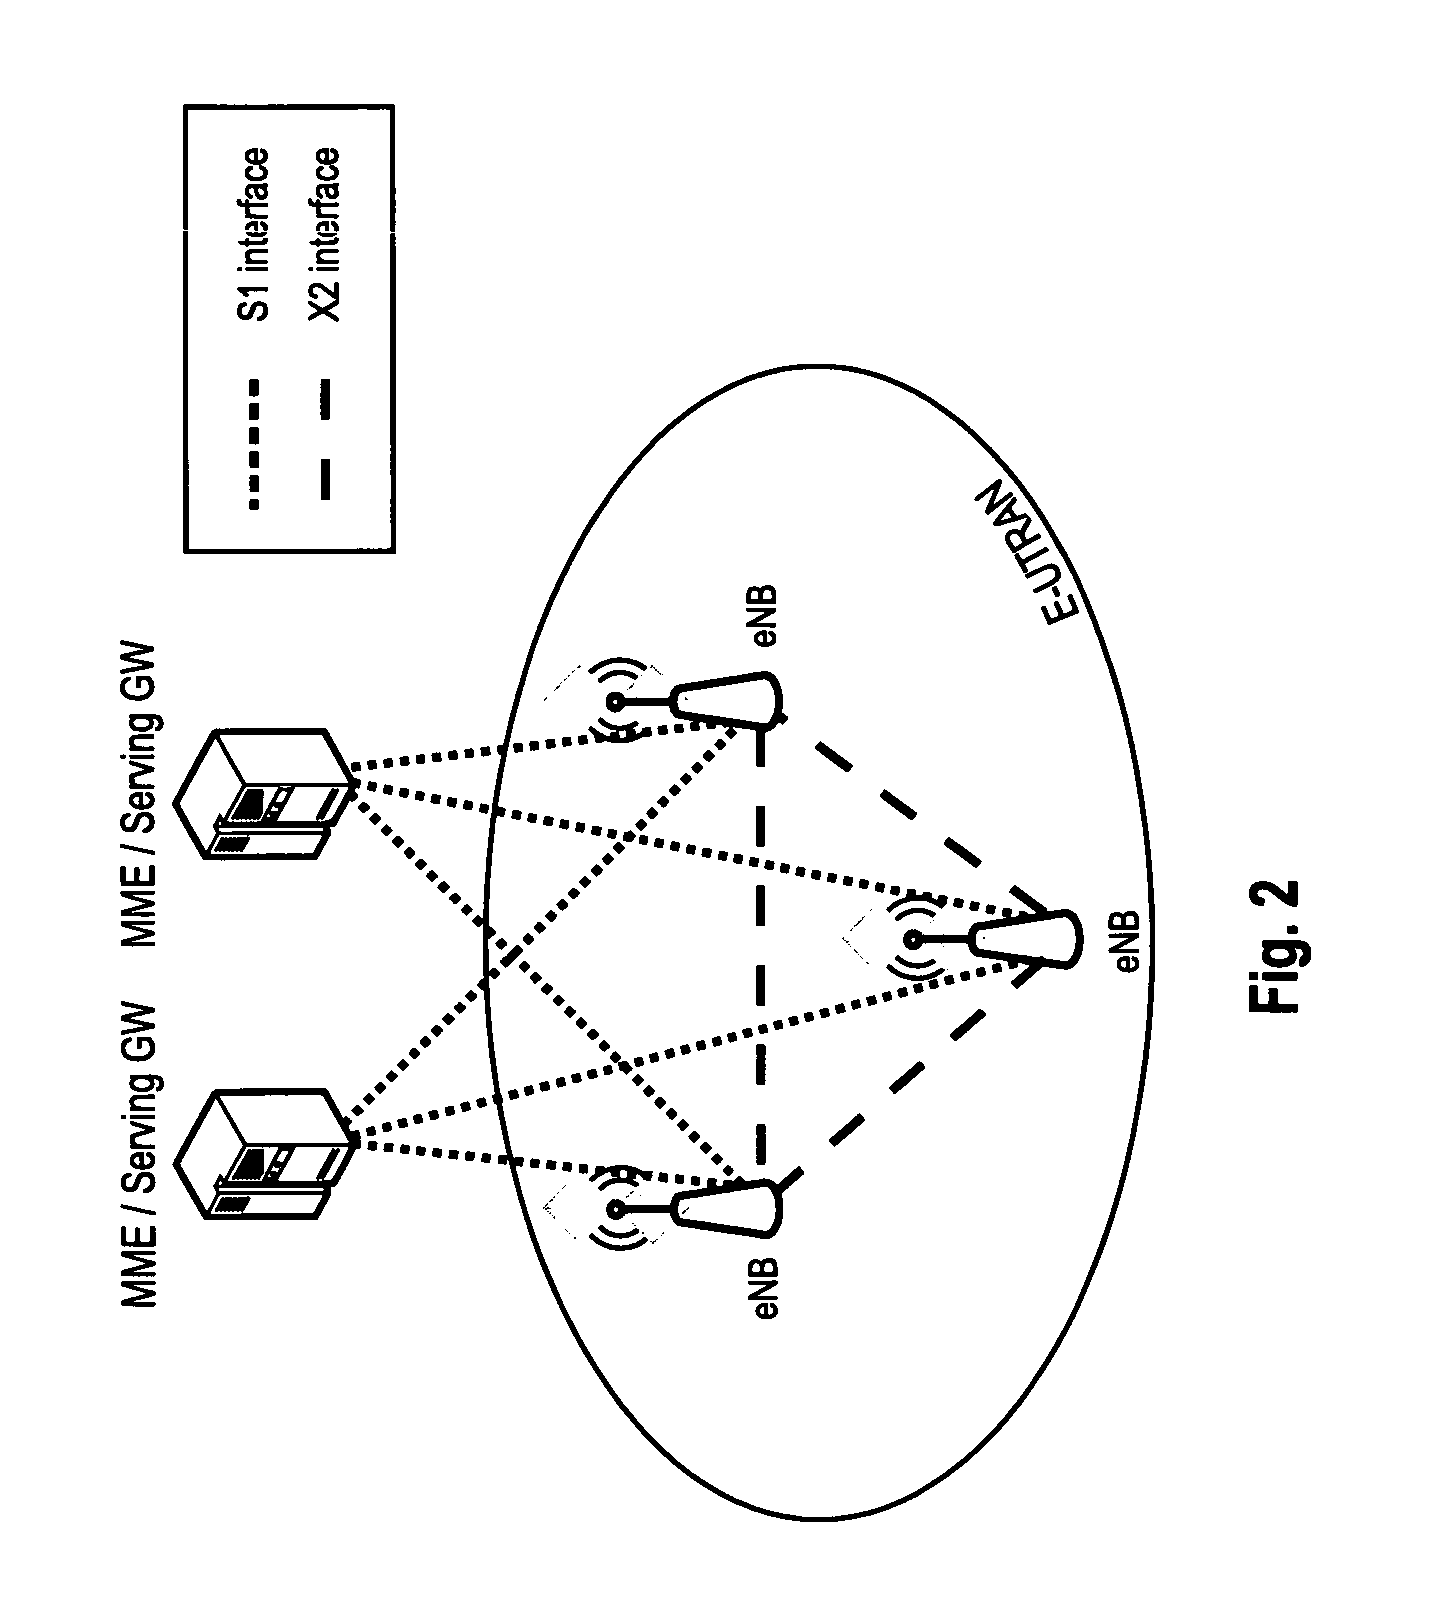 Component carrier activation and deactivation using resource assignments